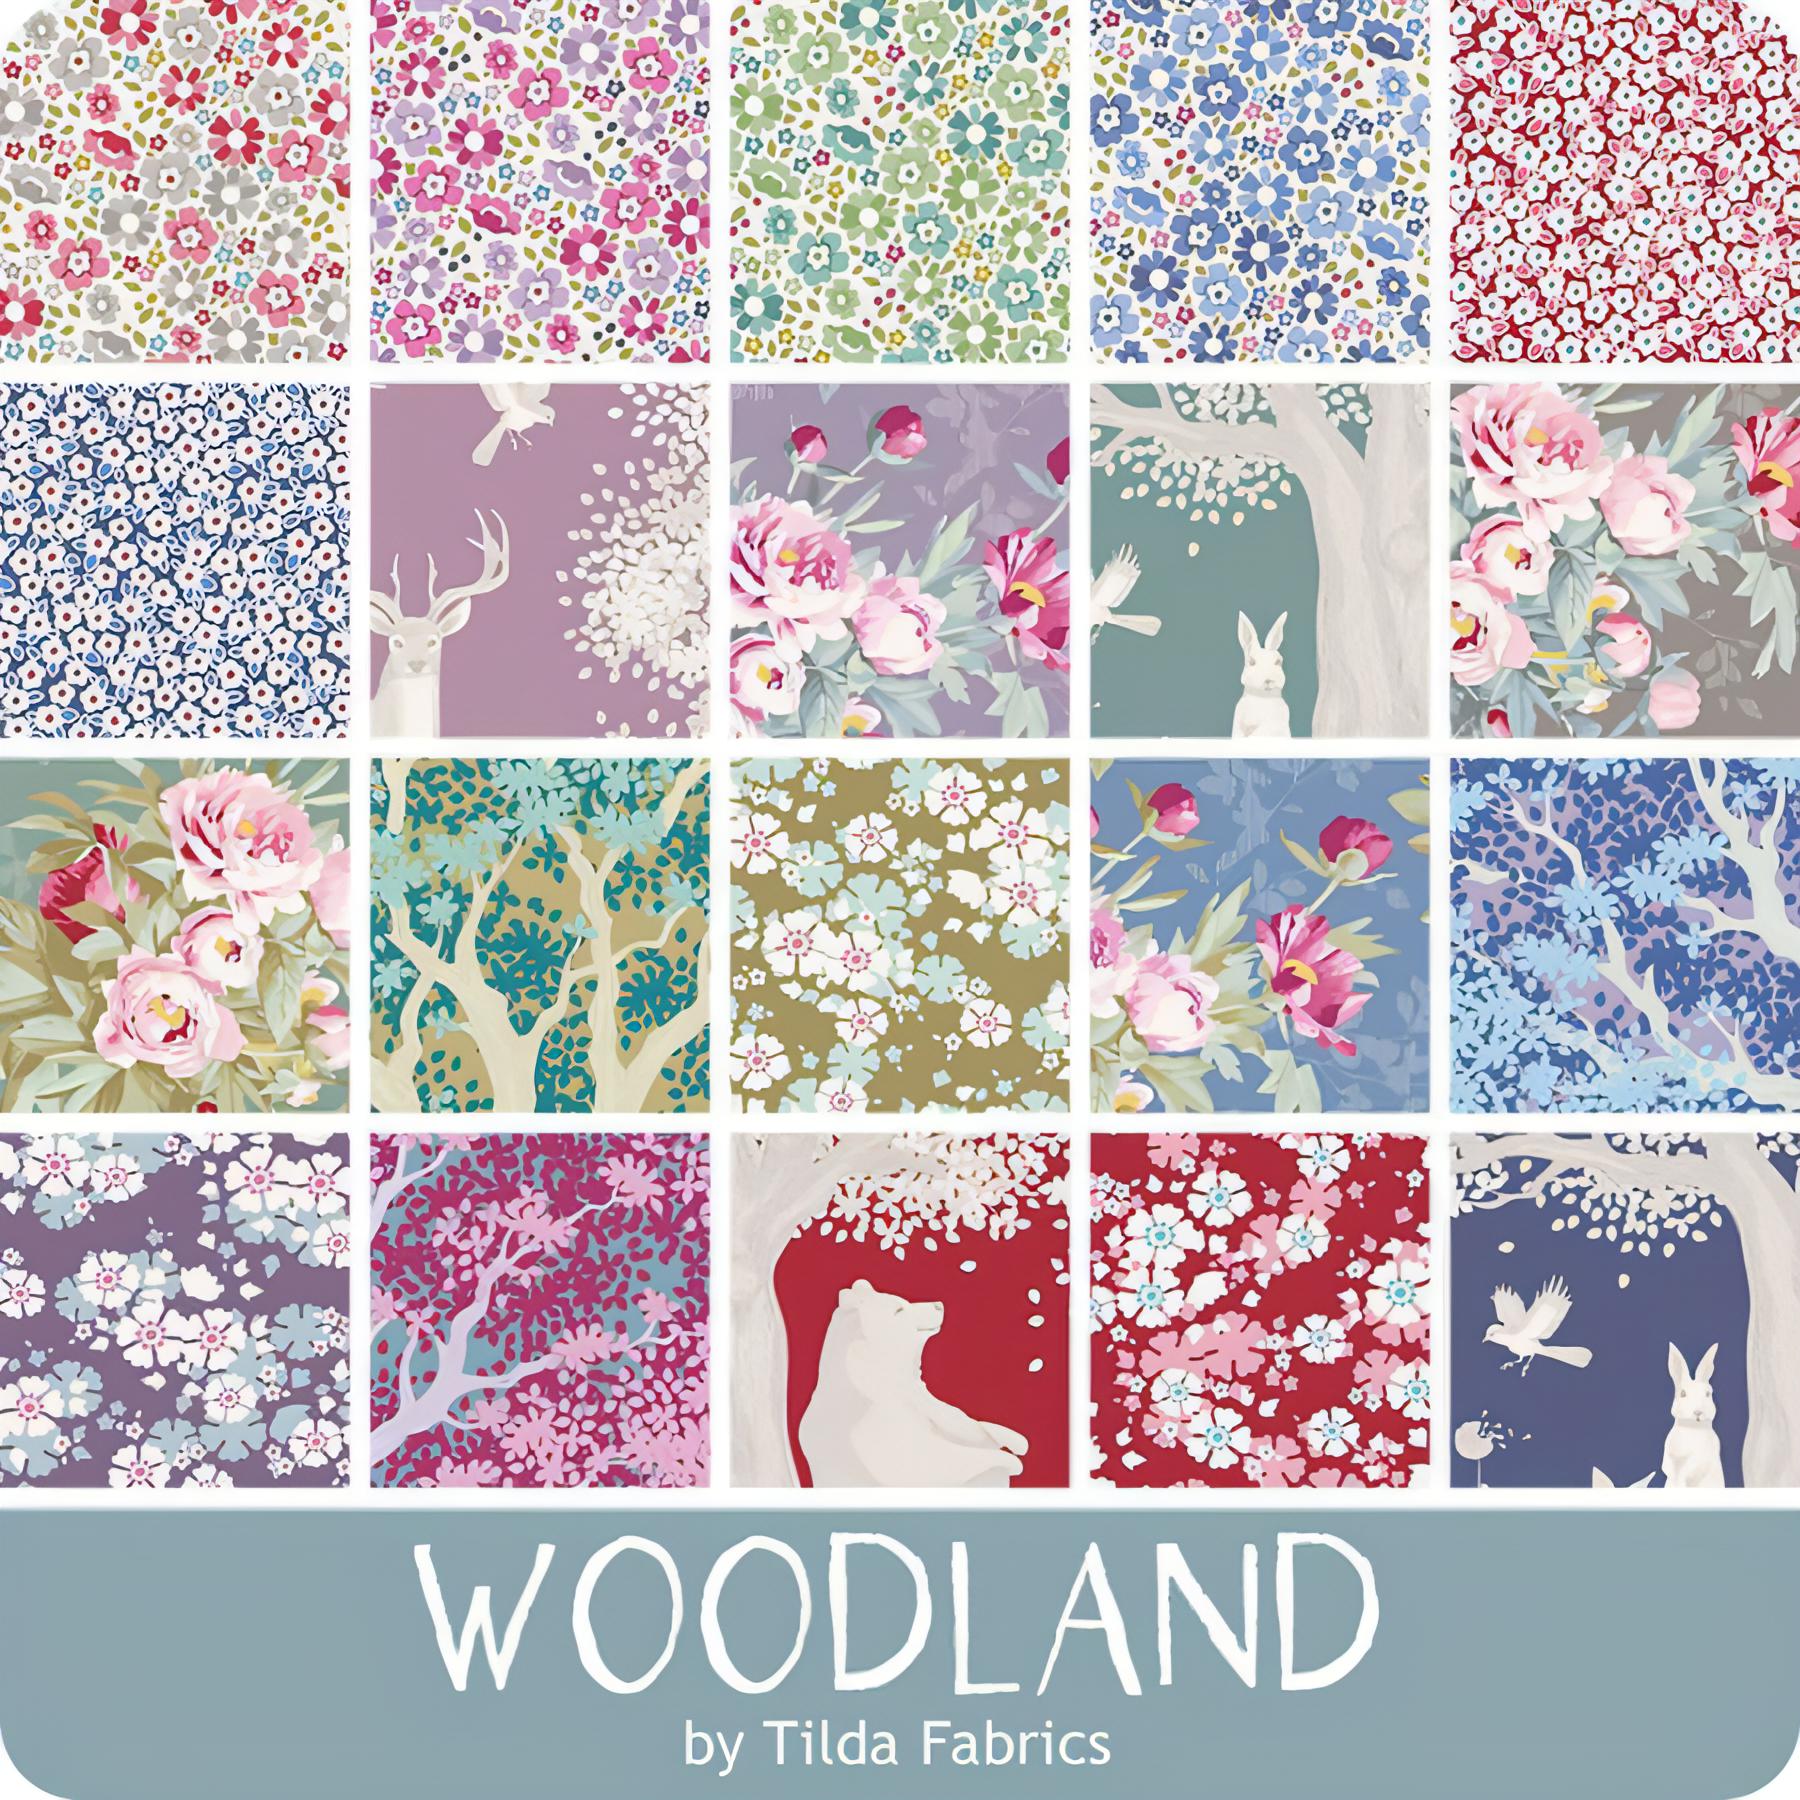 Tilda - Woodland Charm Pack - 12.5cm / 5in squares - 40 Pieces (20 designs) - Assorted